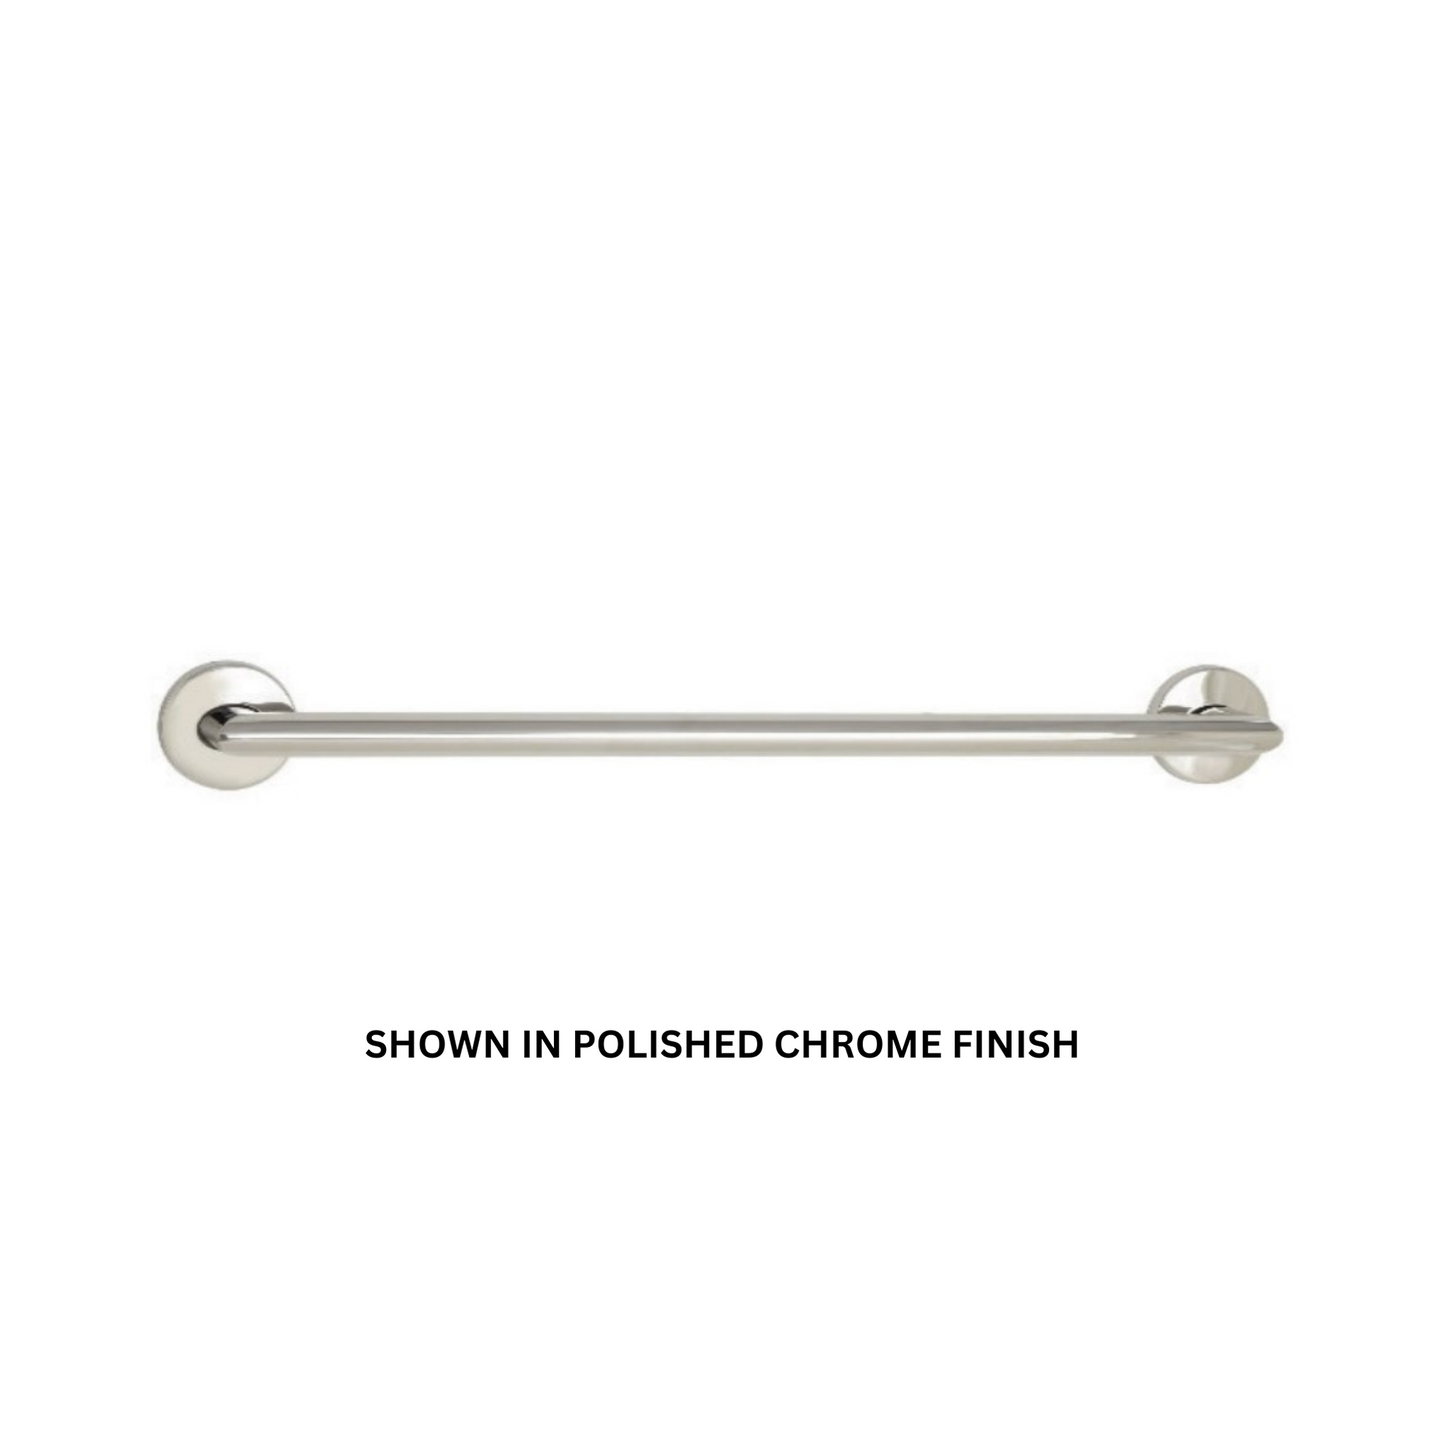 Seachrome Coronado 24" Almond Wrinkle Powder Coat 1.5" Concealed Flanges Oval Grab Bar With Mitered Corners